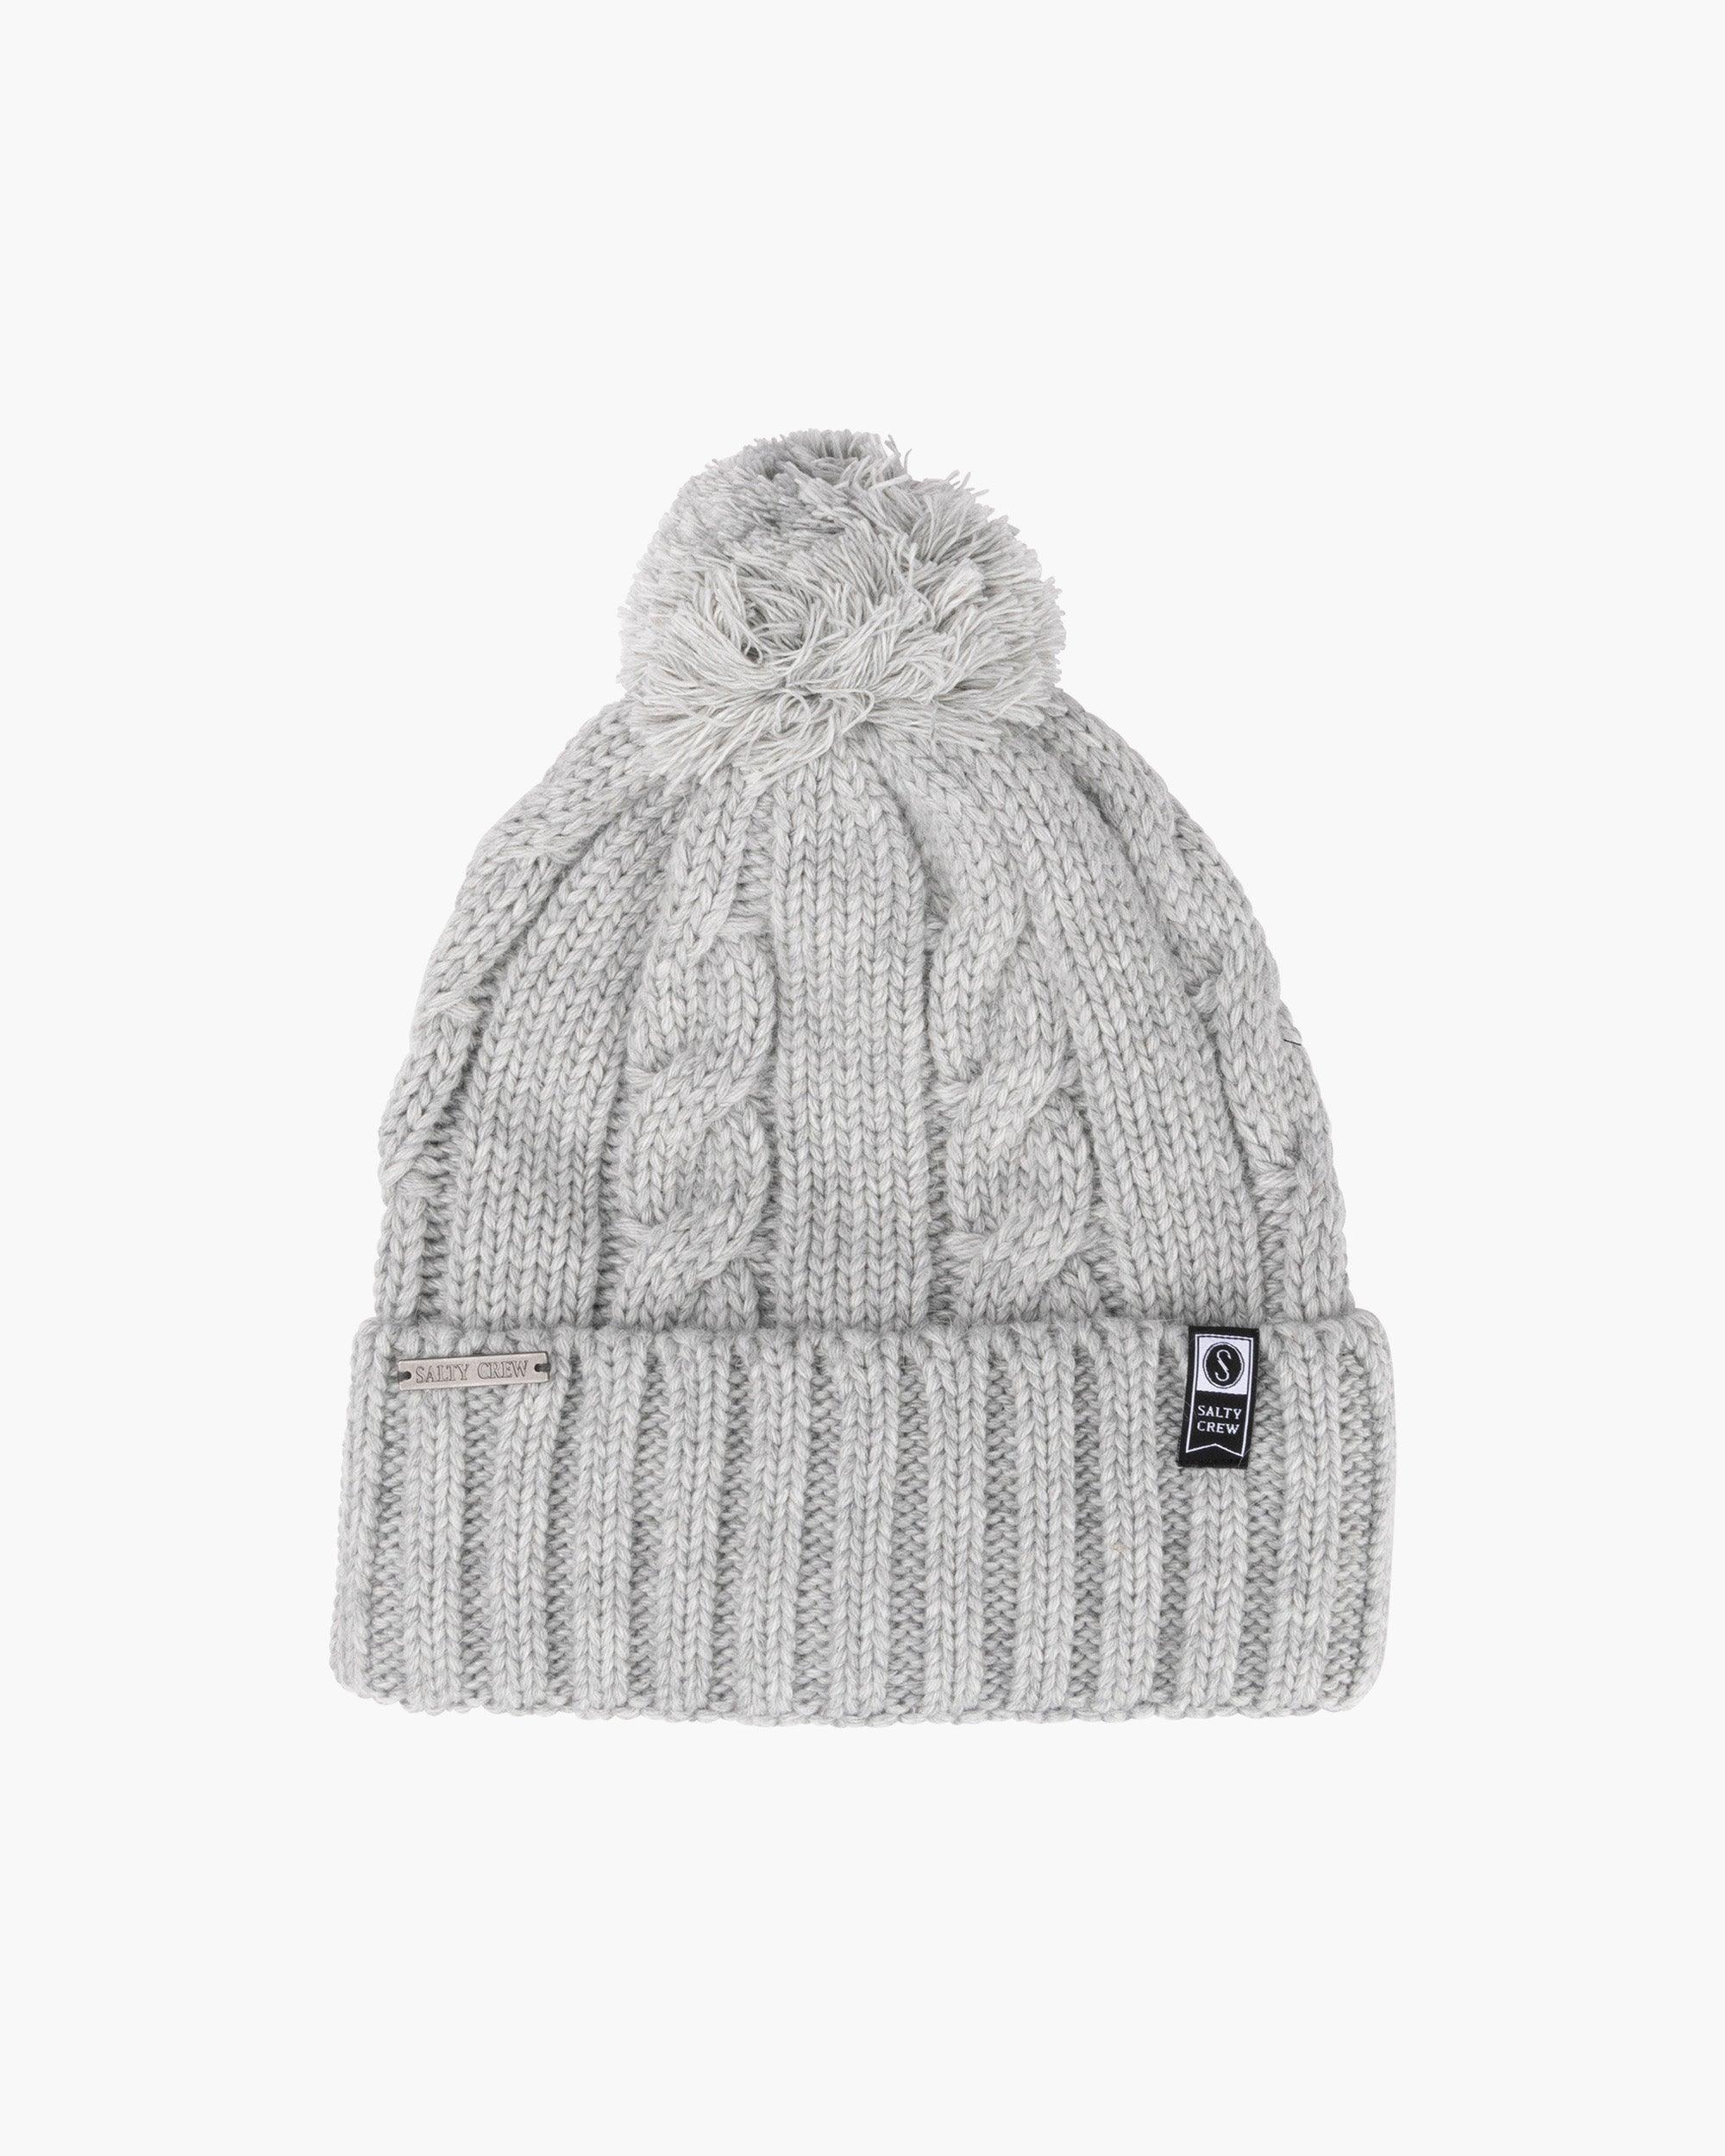 Halyard Athletic Beanie - Heather - Purpose-Built / Home of the Trades